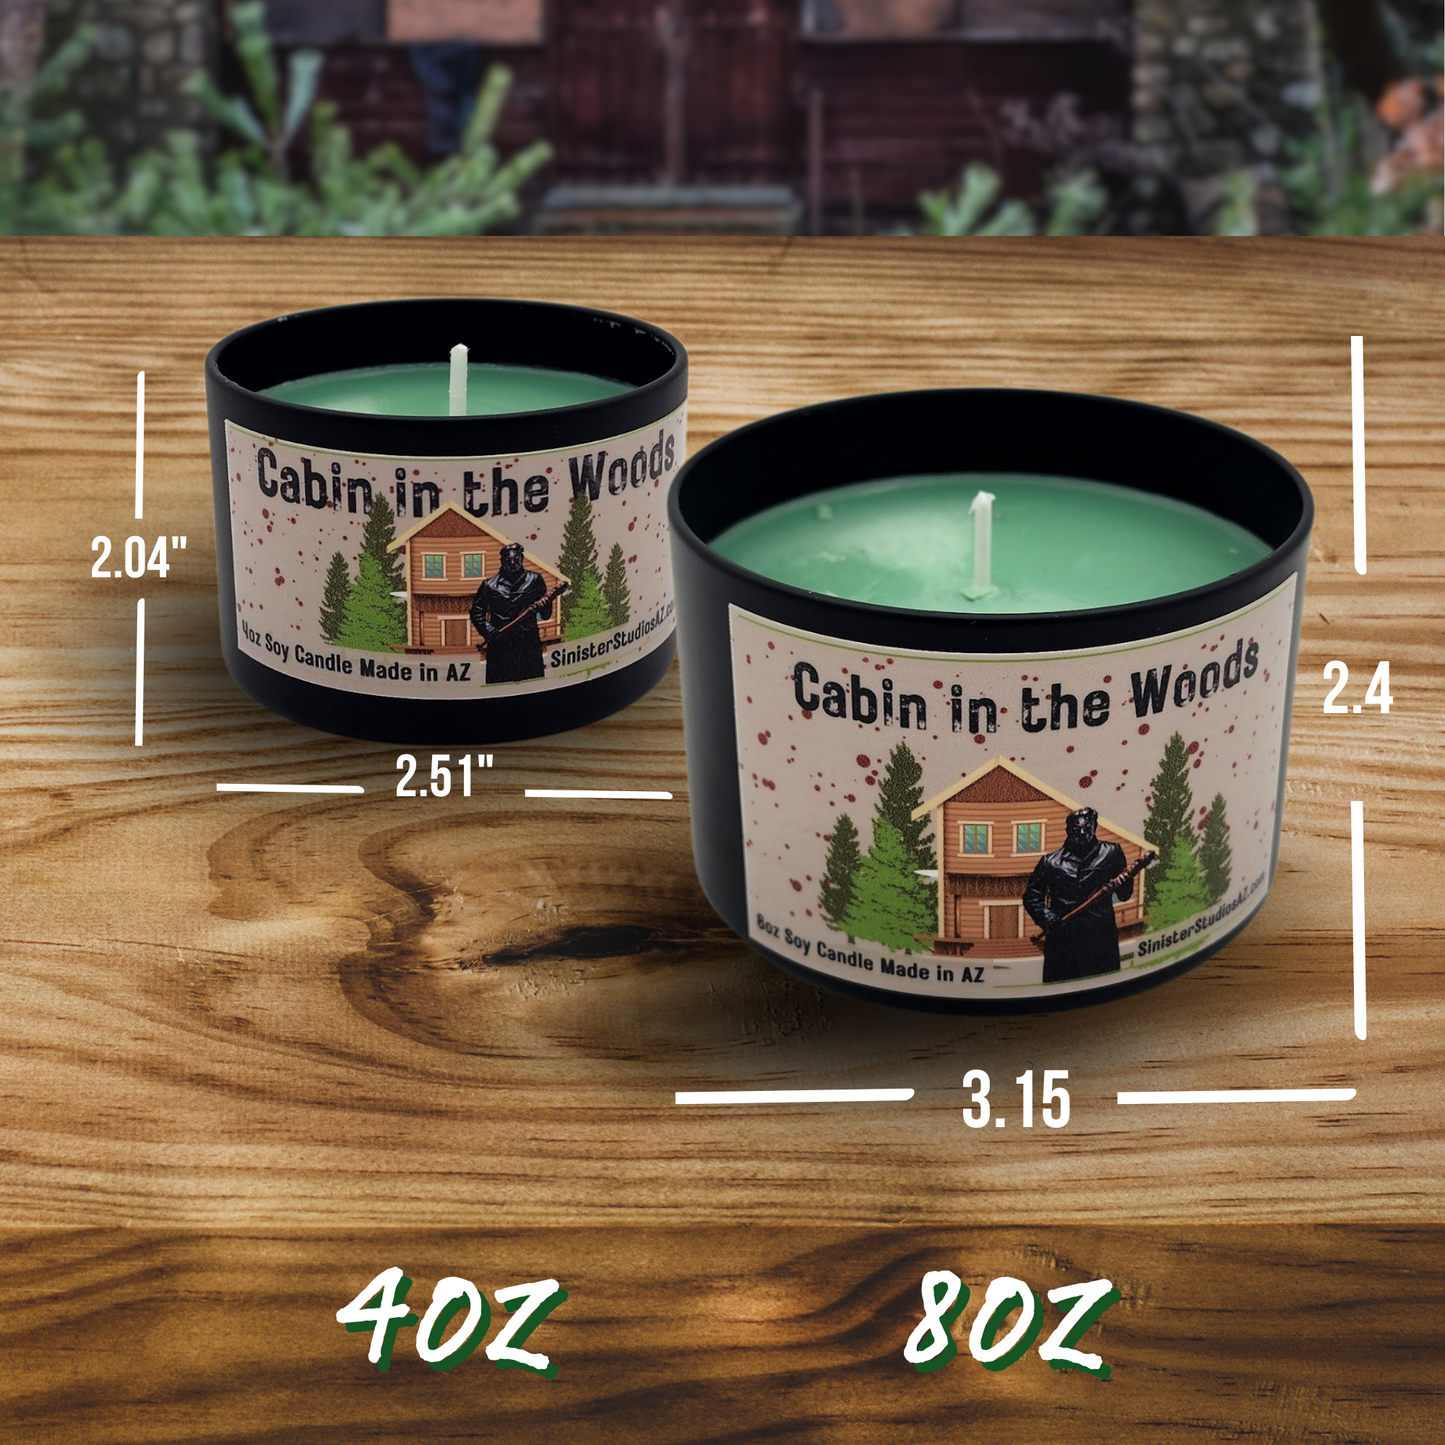 Cabin in the Woods Soy candle spooky candle gift creepy home decor gift for her birthday gift campfire candle for him pine tree scented soy candle